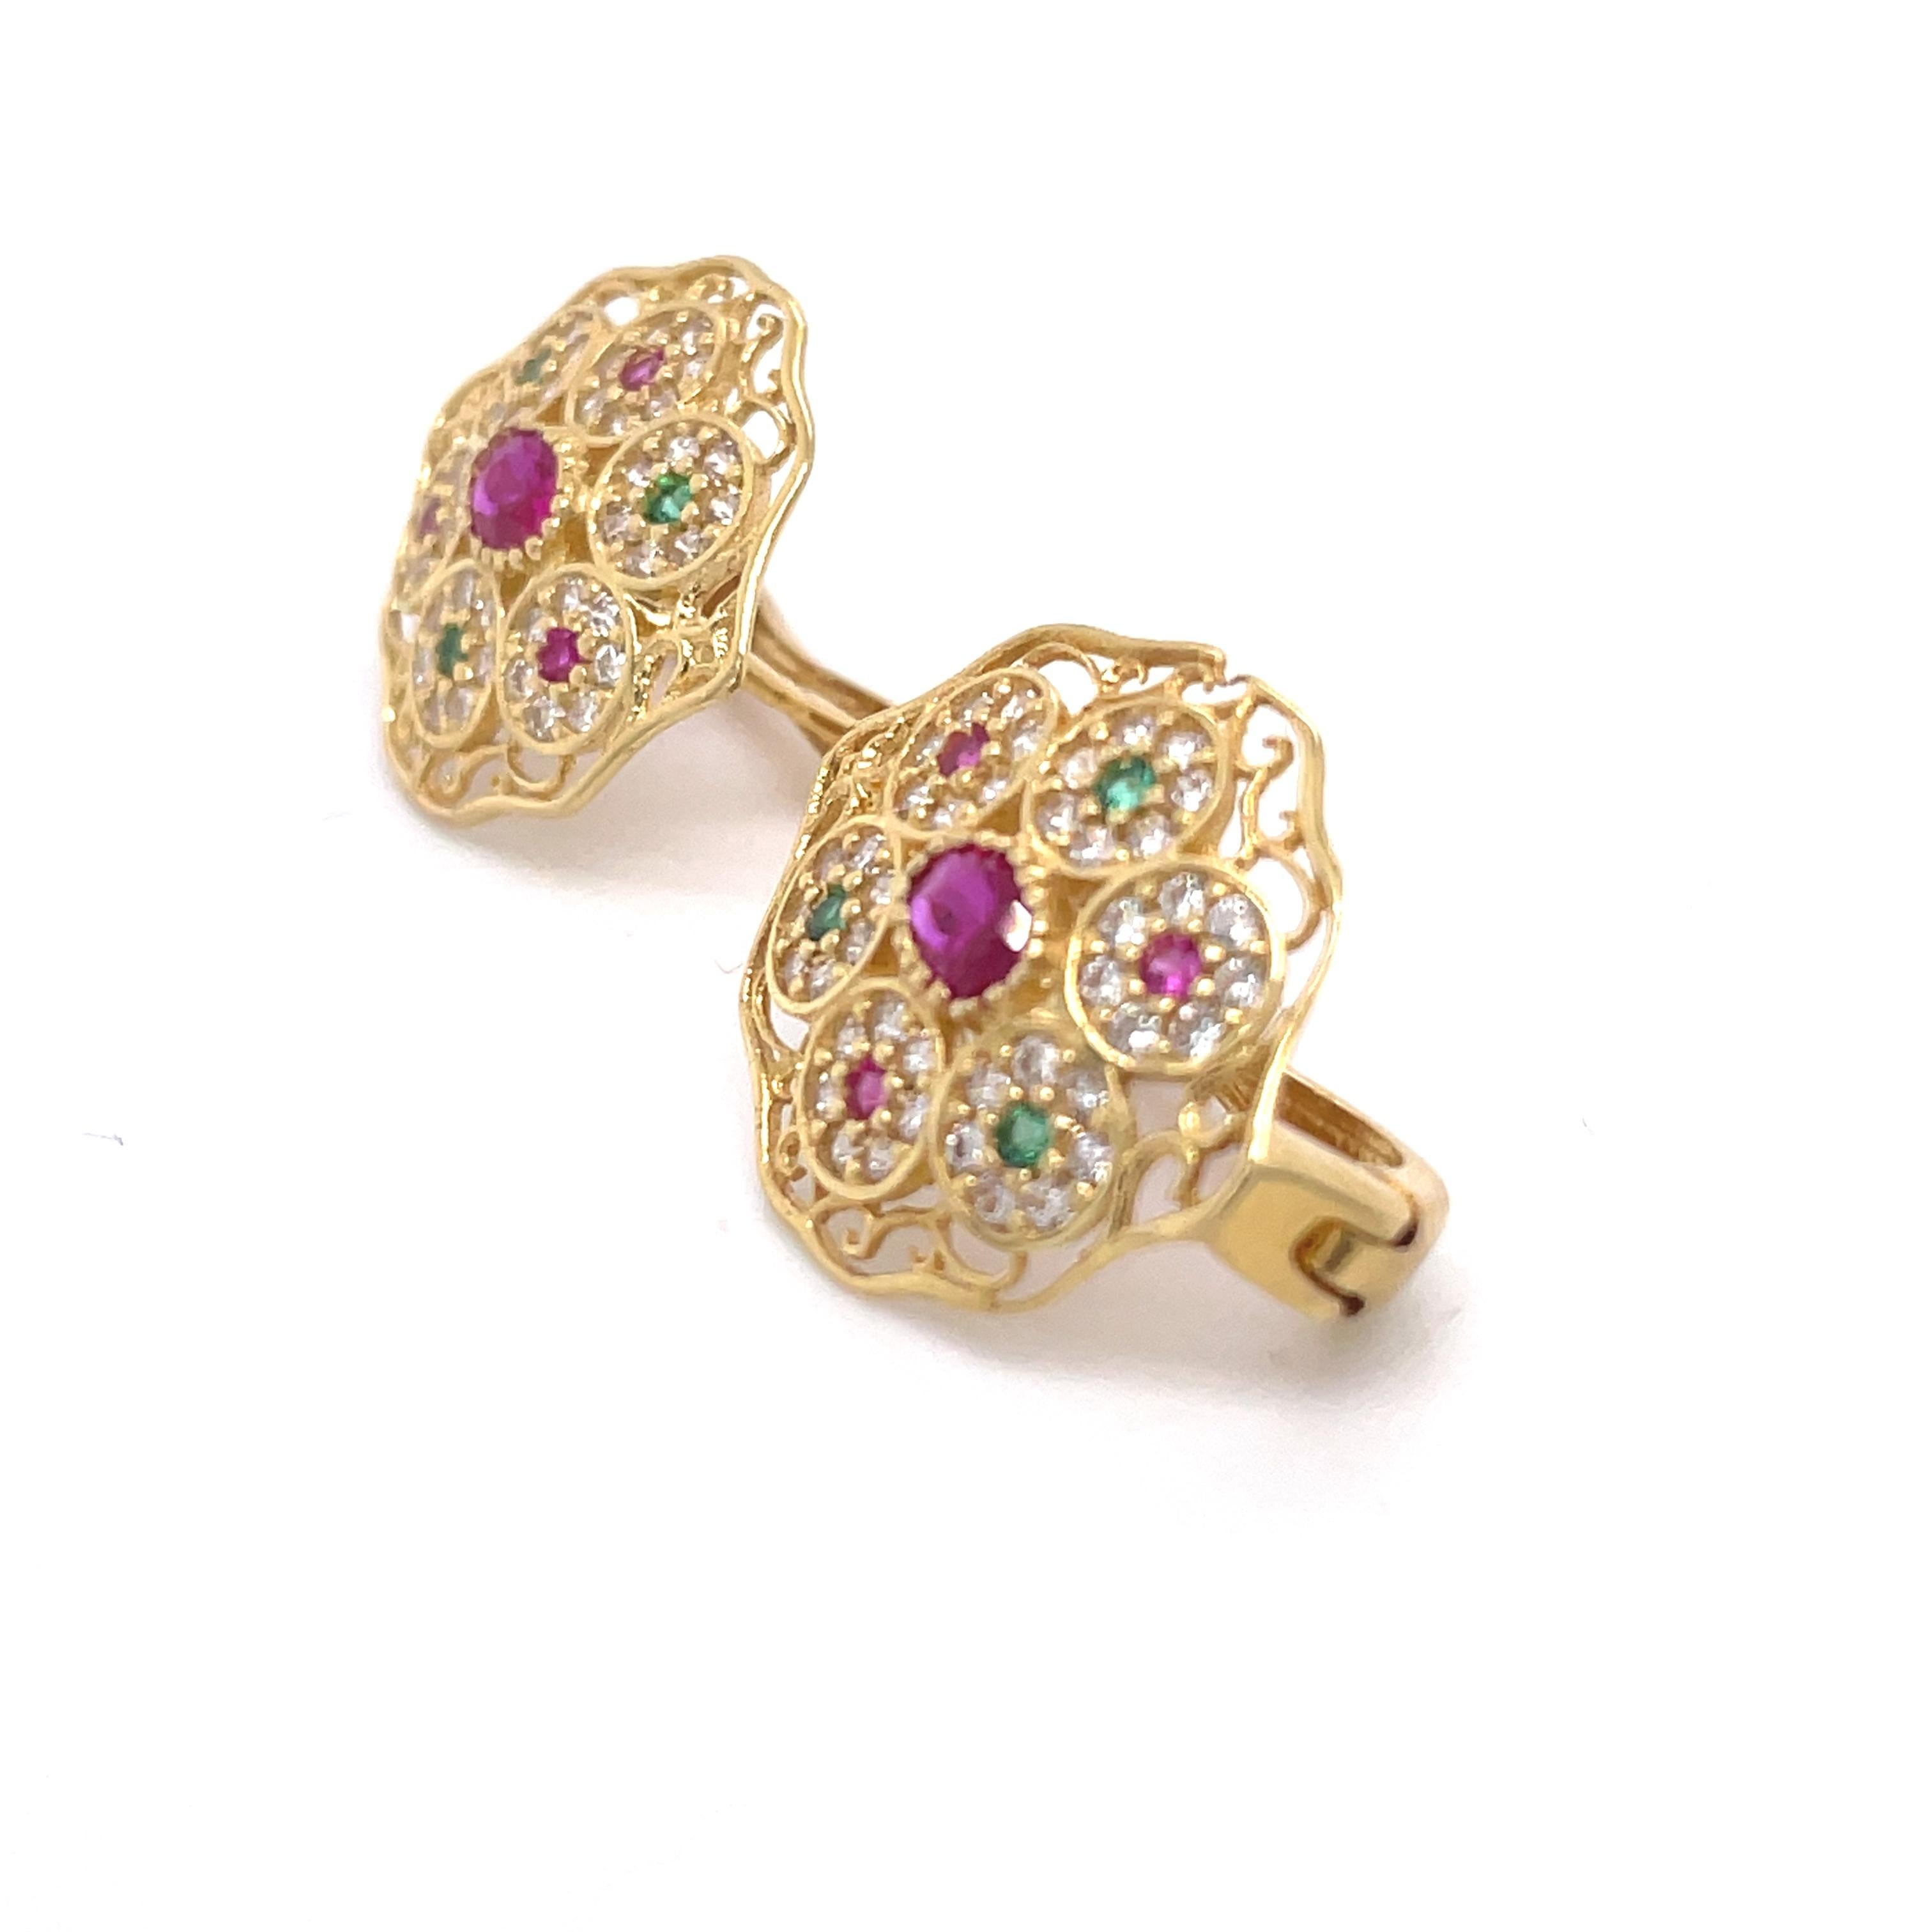 Vintage Art Deco Earrings- 18k Yellow Gold Oval+Round Multi-Color Cubic Zirconia For Sale 2